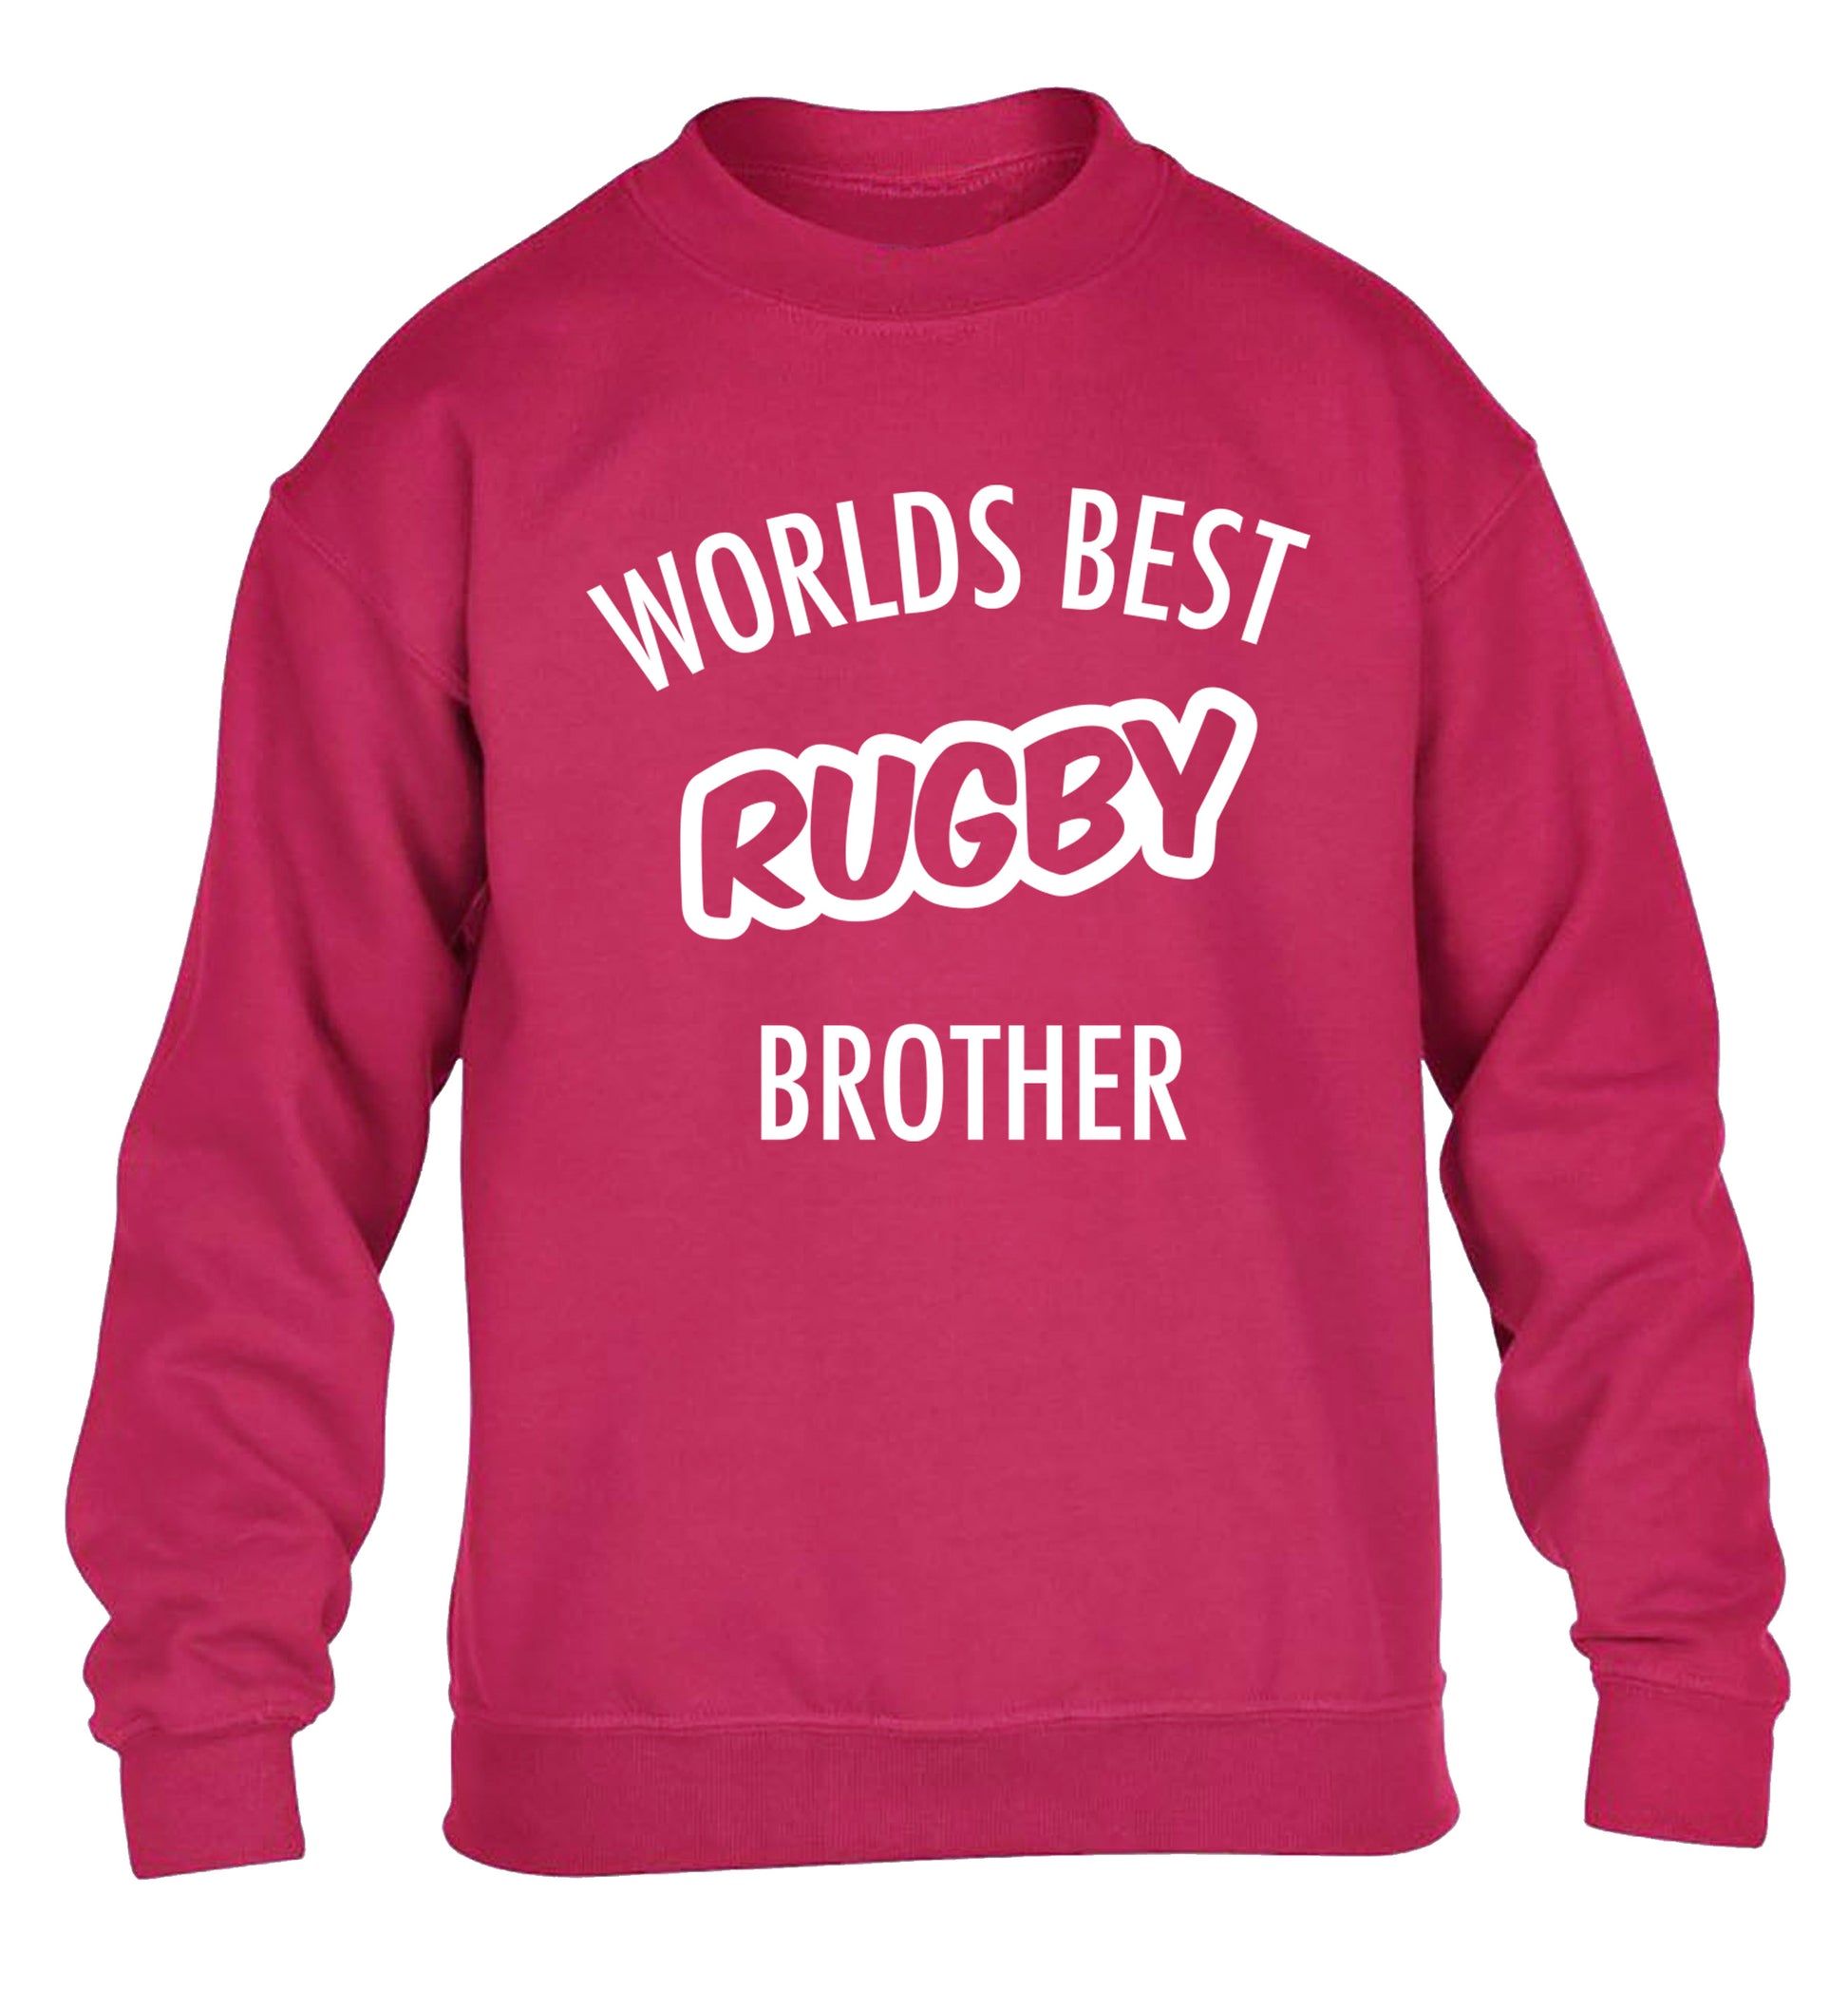 Worlds best rugby brother children's pink sweater 12-13 Years